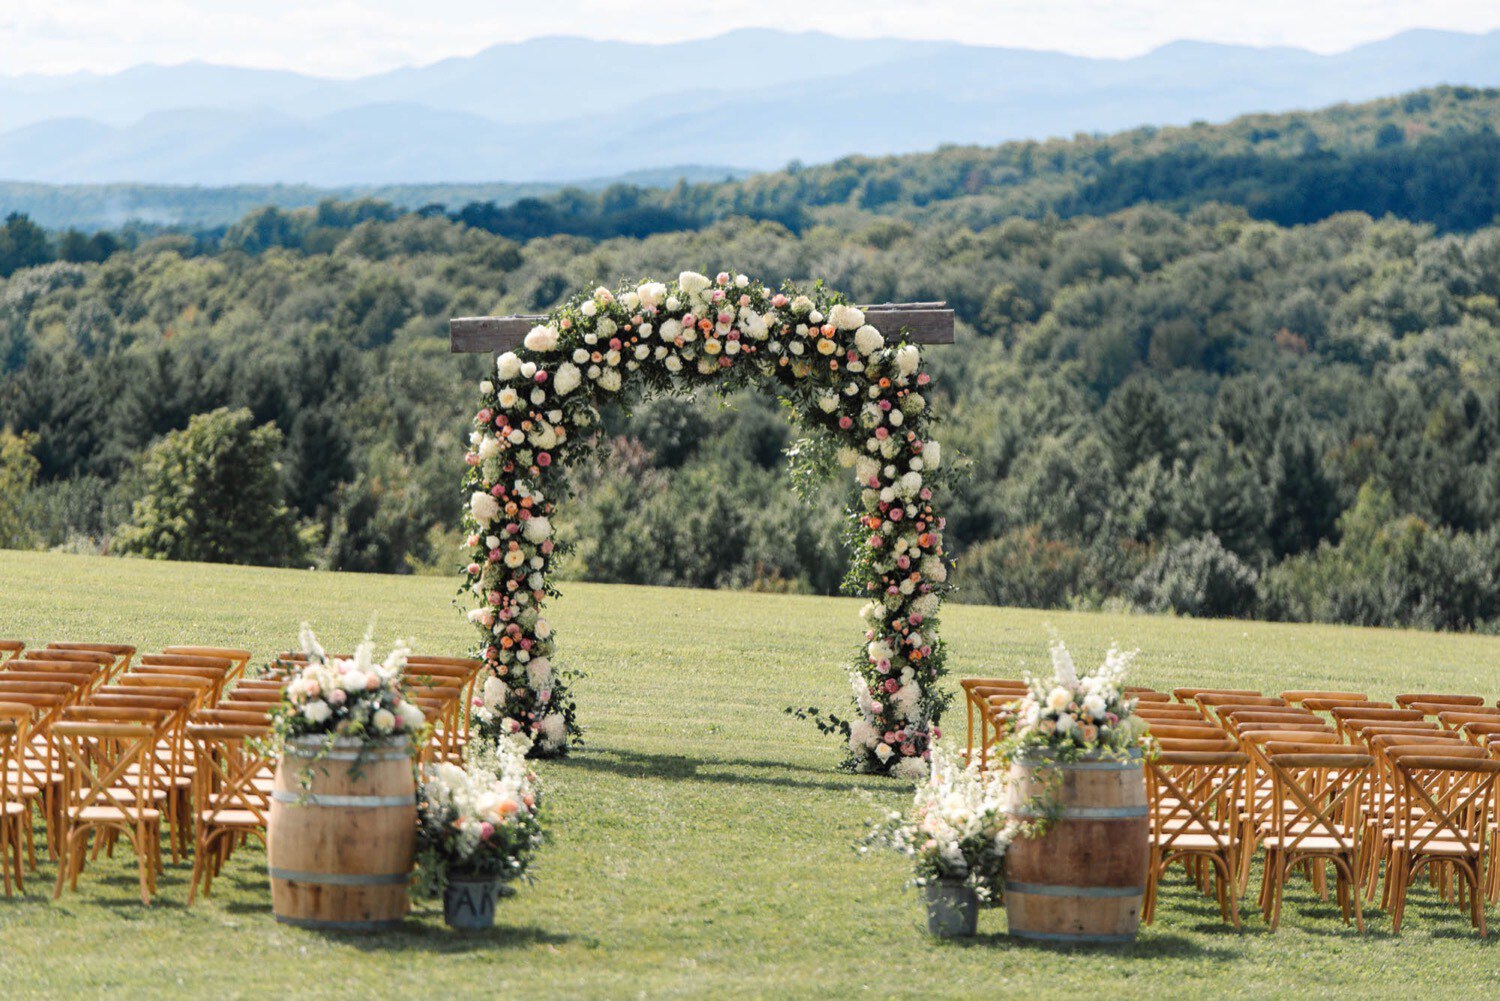 Arbor adorned by Clayton Floral, hydrangea, chrysanthemum, roses, lilies, at Maquam barn and Winery